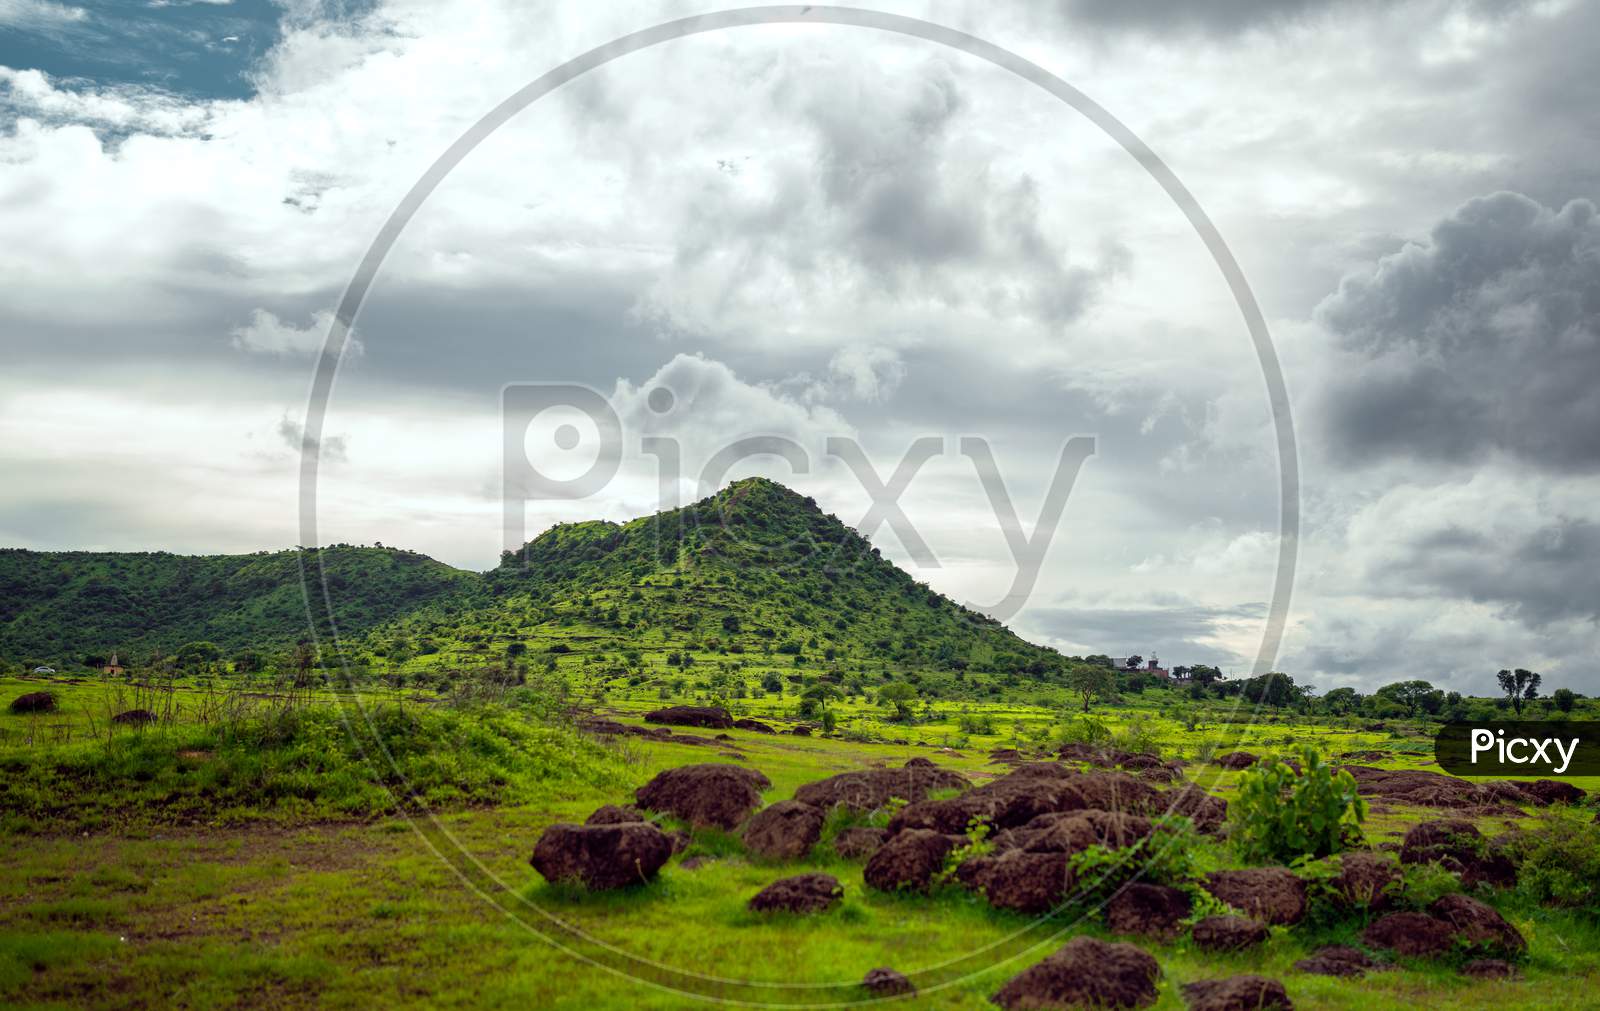 Green hill cloudy sky landscape image